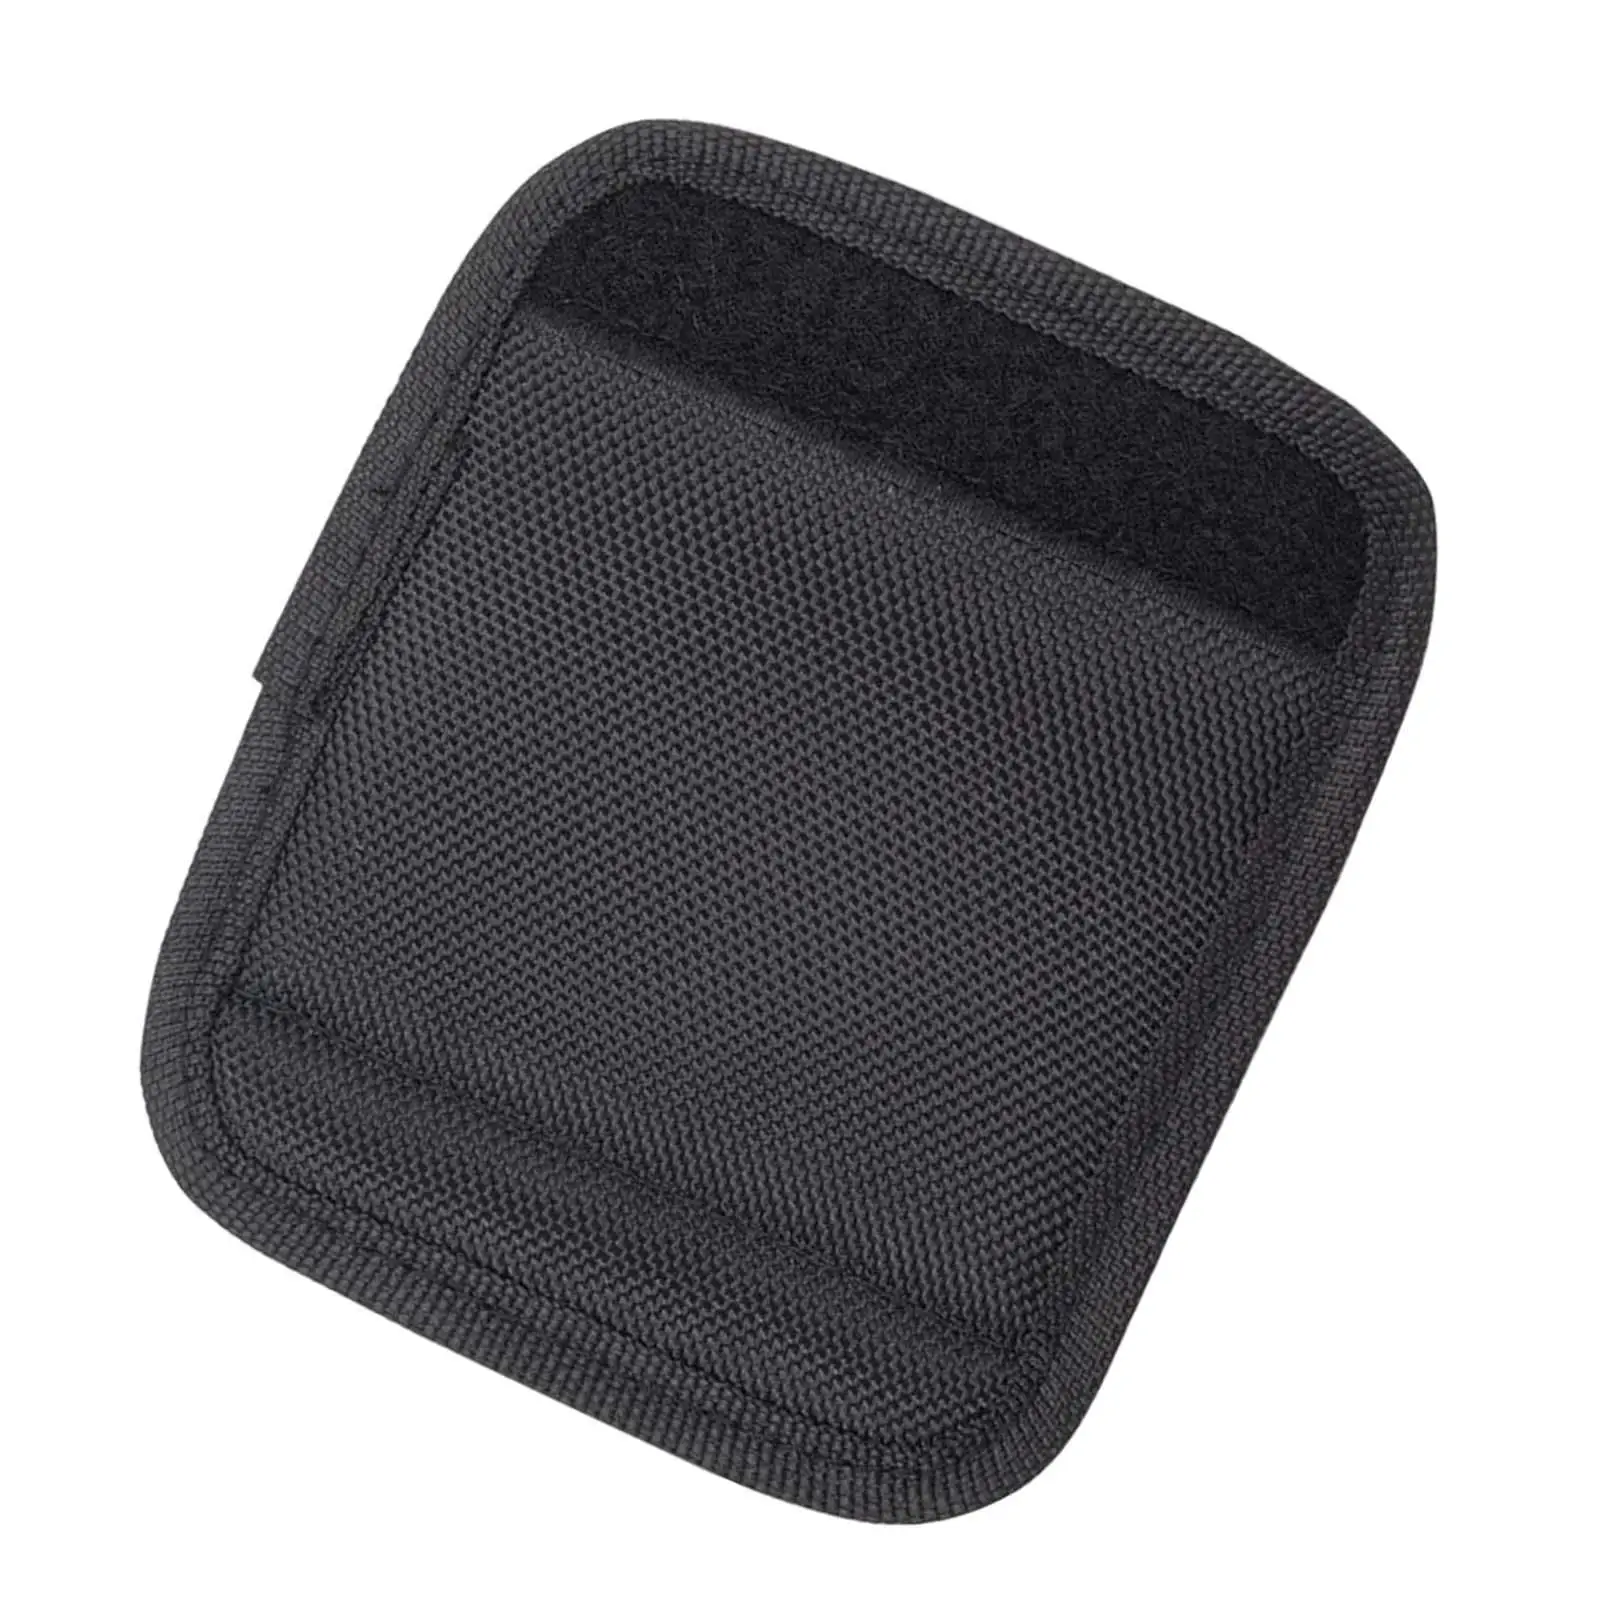 

Luggage Handle Wraps Grip Cover Black Tags Identifiers Multifunctional Accessory Durable Easily Install Luggage Accessories